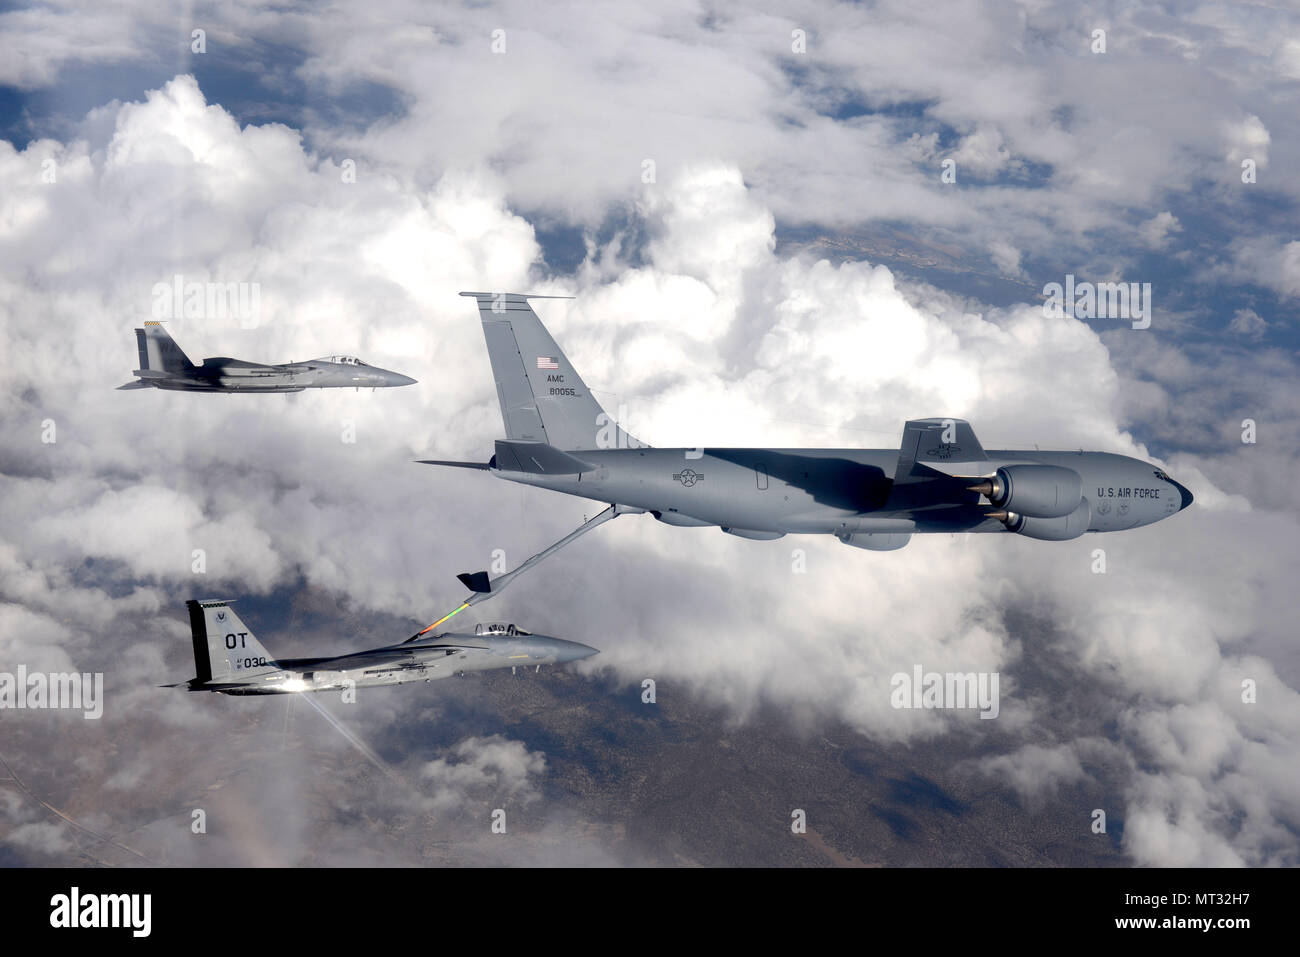 An F-15 fighter jet, assigned to the 433rd Weapons Squadron, at Nellis Air Force Base, Nevada, receives aerial refueling from a KC-135 Stratotanker cargo aircraft assigned to the 509th Weapons Squadron, at Fairchild Air Force Base, Washington, over the Nevada Test and Training Range July 10, 2017. The United States Air Force Weapons School teaches graduate-level instructor courses that provide the world's most advanced training in weapons and tactics employment to officers of the combat air forces and mobility air forces. (U.S. Air Force photo by Staff Sgt. Daryn Murphy/Released) Stock Photo